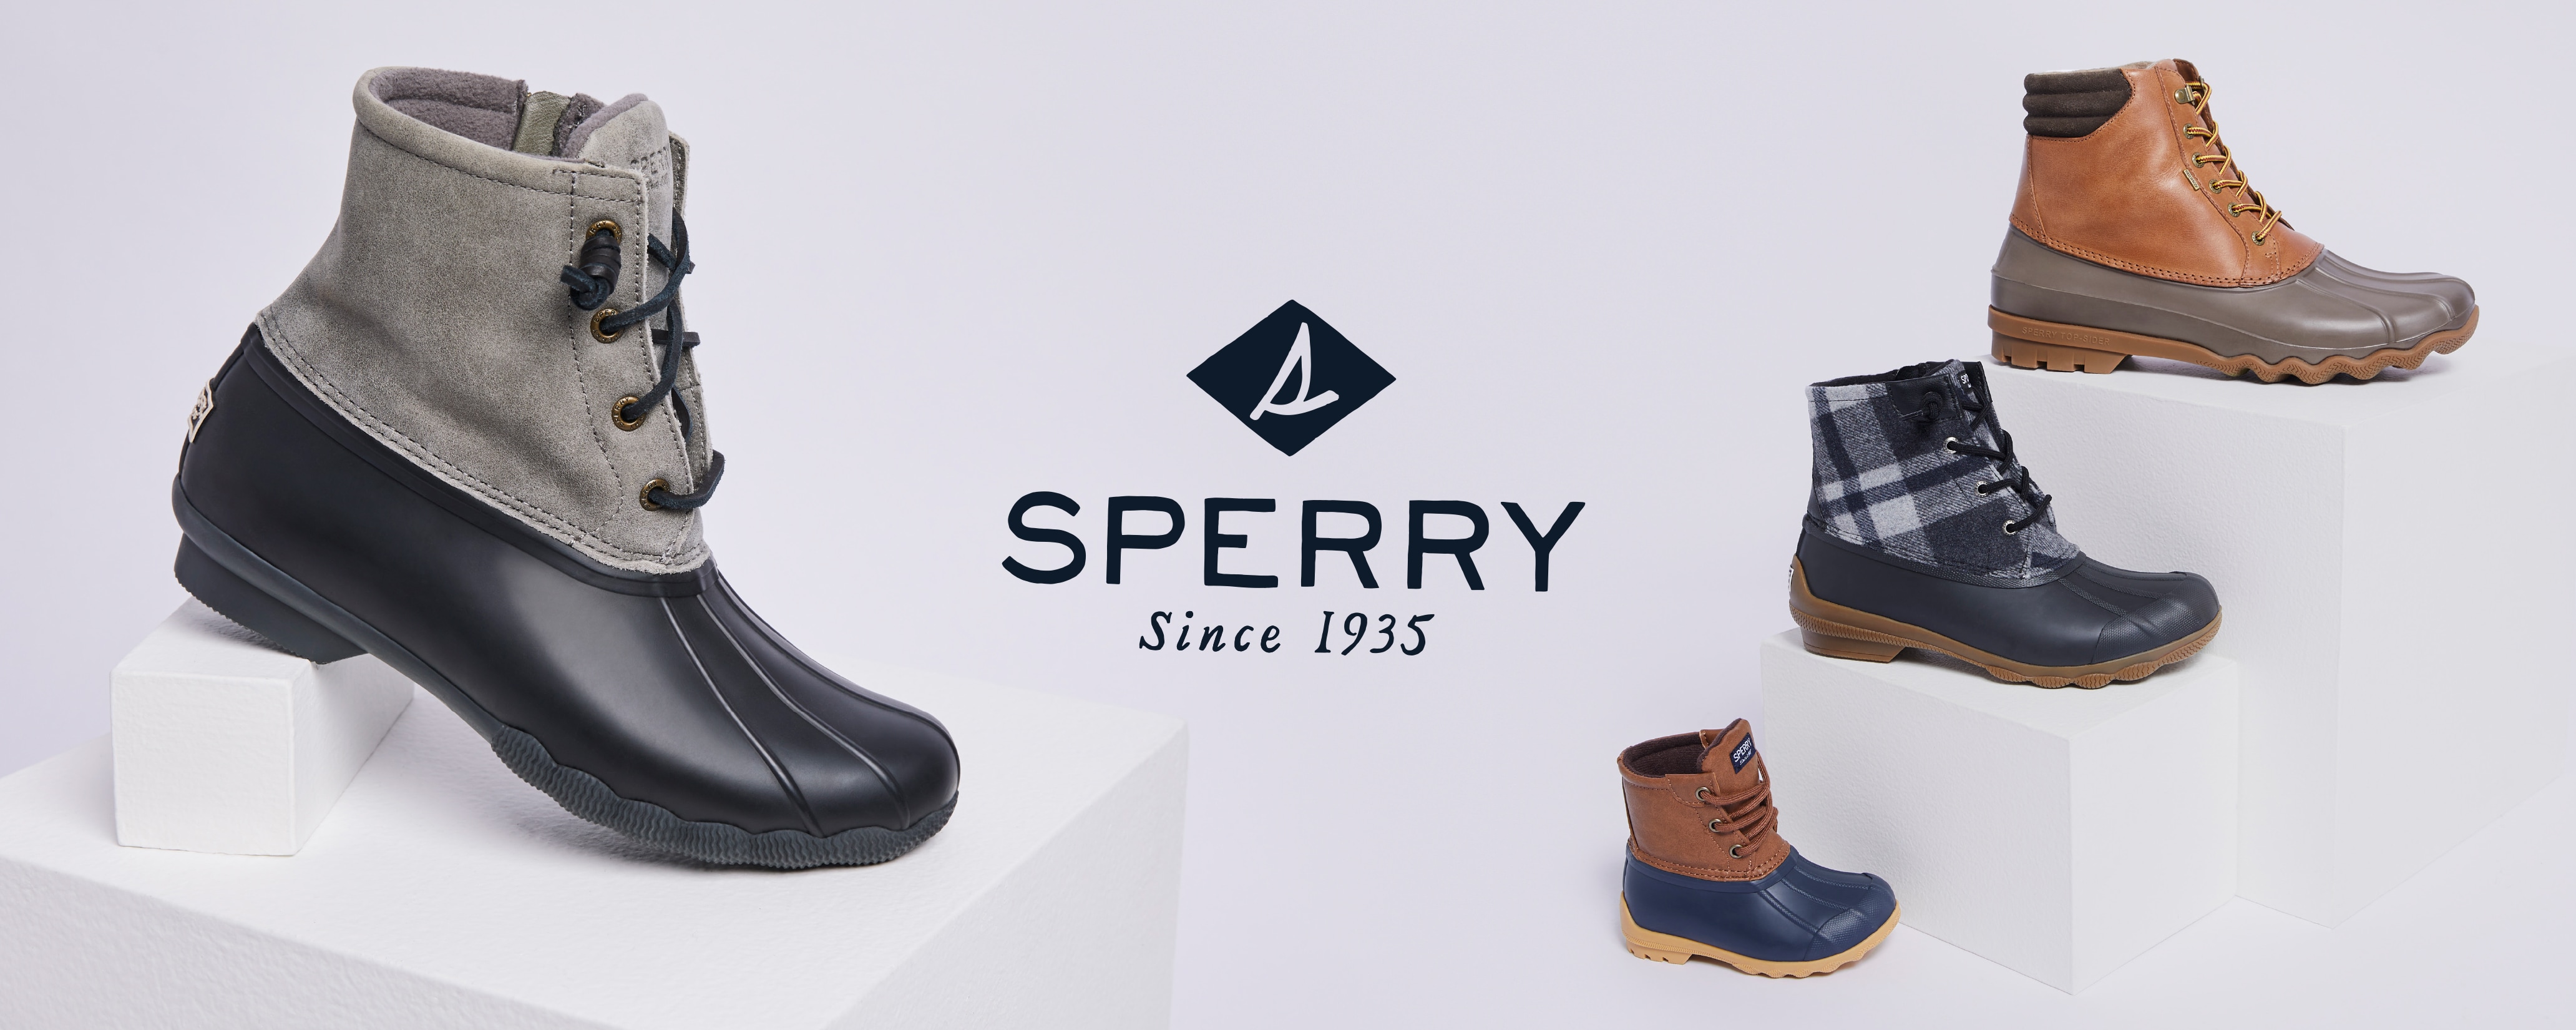 Sperry Shoes, Boots \u0026 Boat Shoes | DSW 